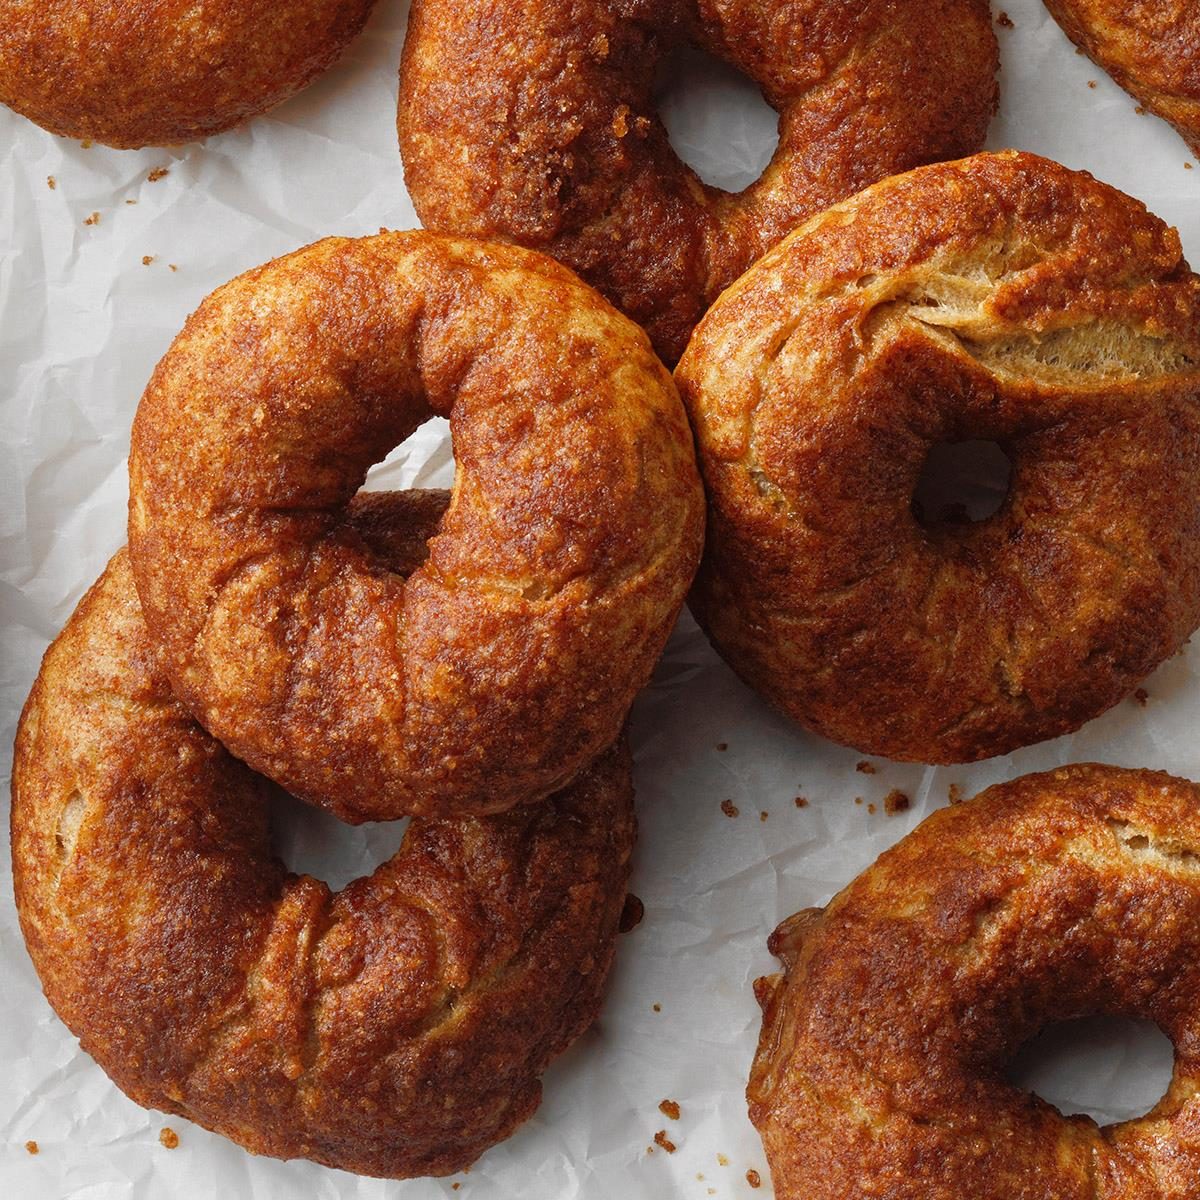 https://www.tasteofhome.com/wp-content/uploads/2018/01/Cinnamon-Bagels-with-Crunchy-Topping_EXPS_CIBZ22_50381_BonE12_09_10b-11.jpg